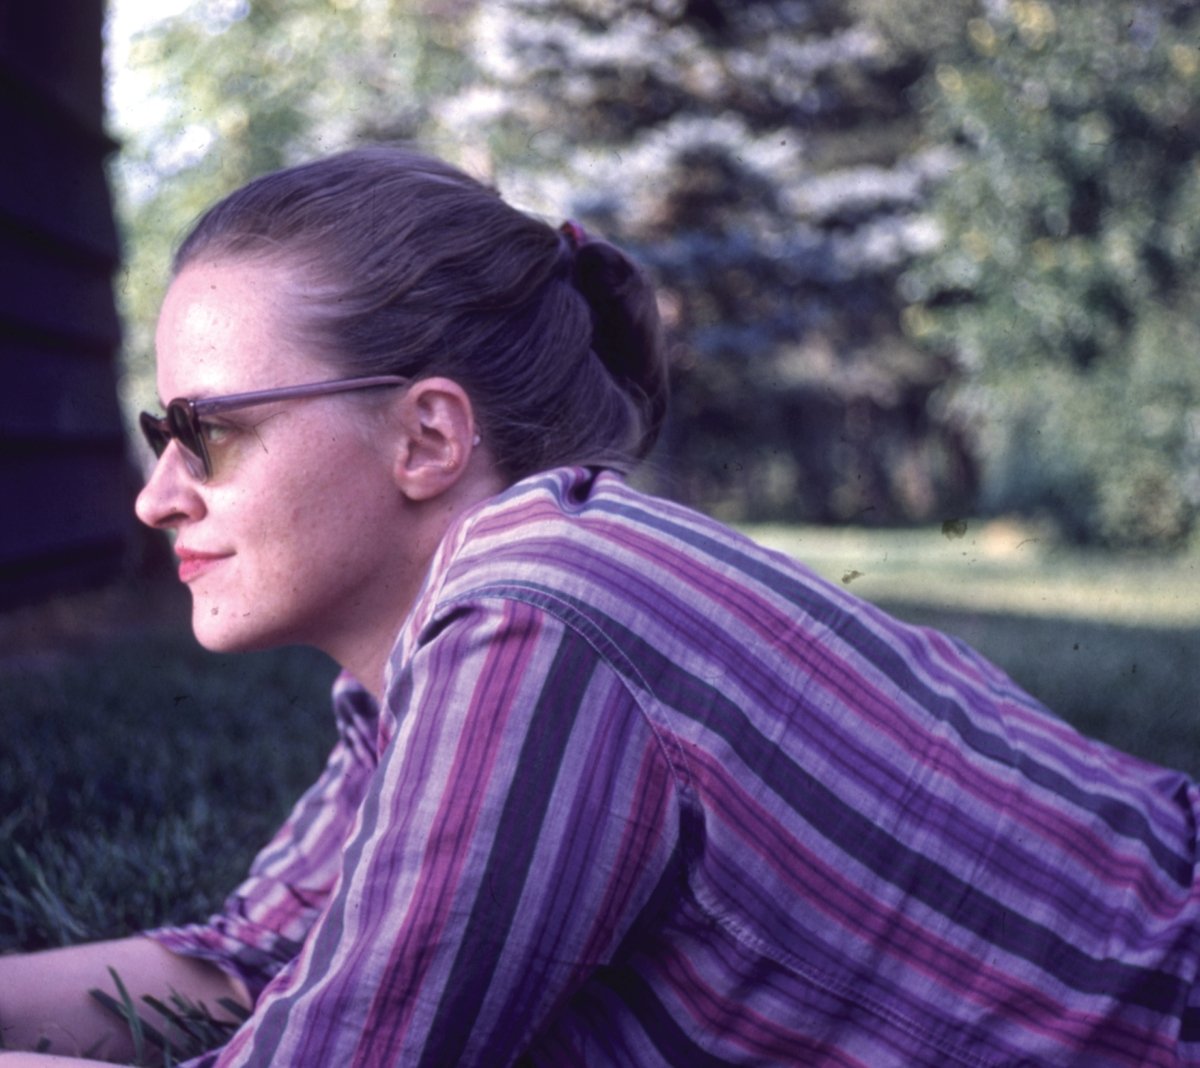 Vanity Of Vanities - A Tribute To Connie Converse